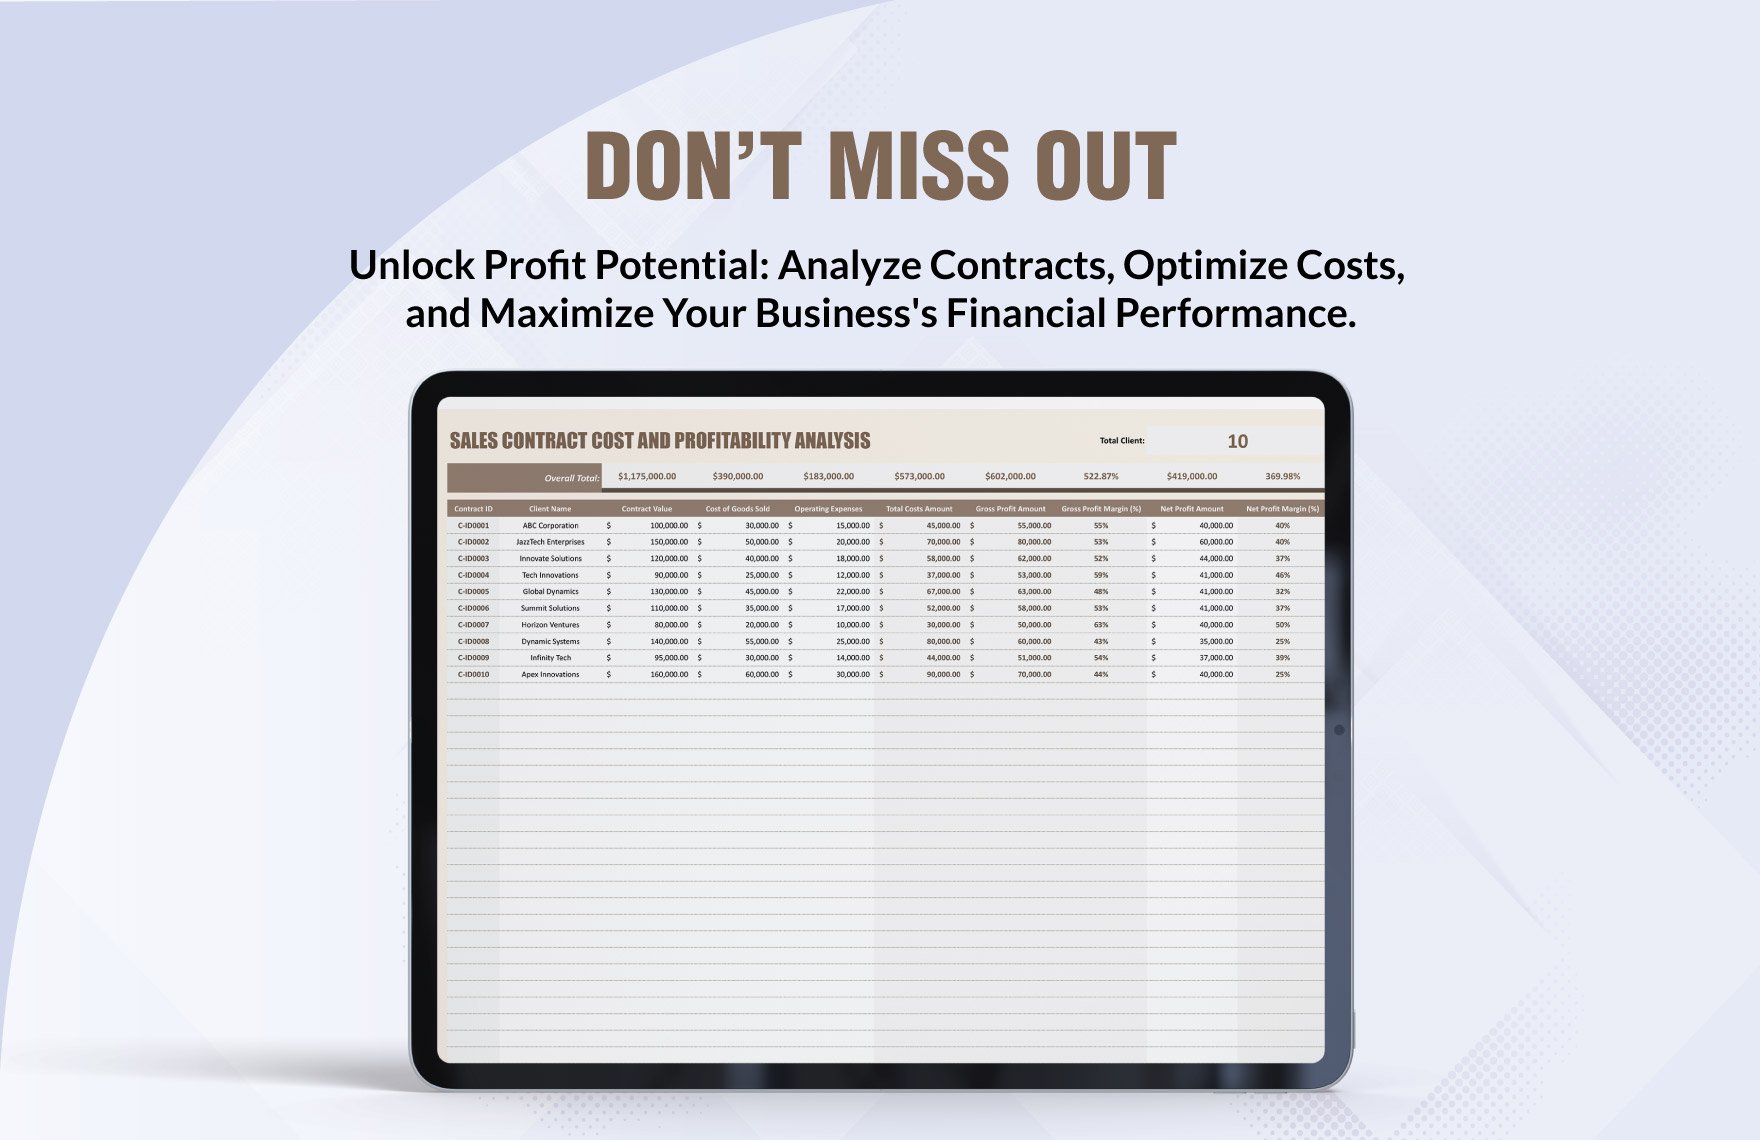 Sales Contract Cost and Profitability Analysis Template